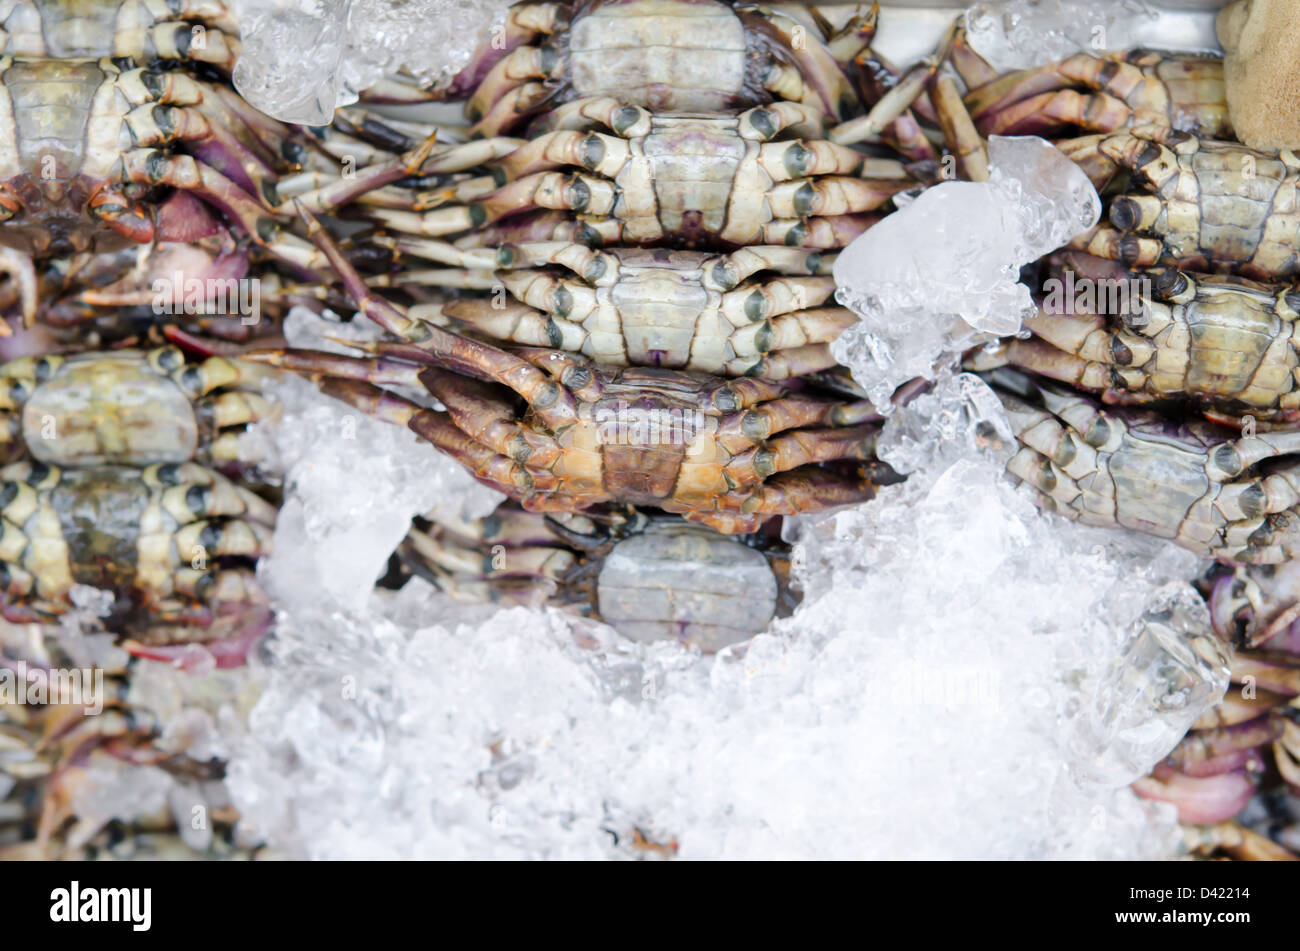 crabs in ice , market of thailand Stock Photo